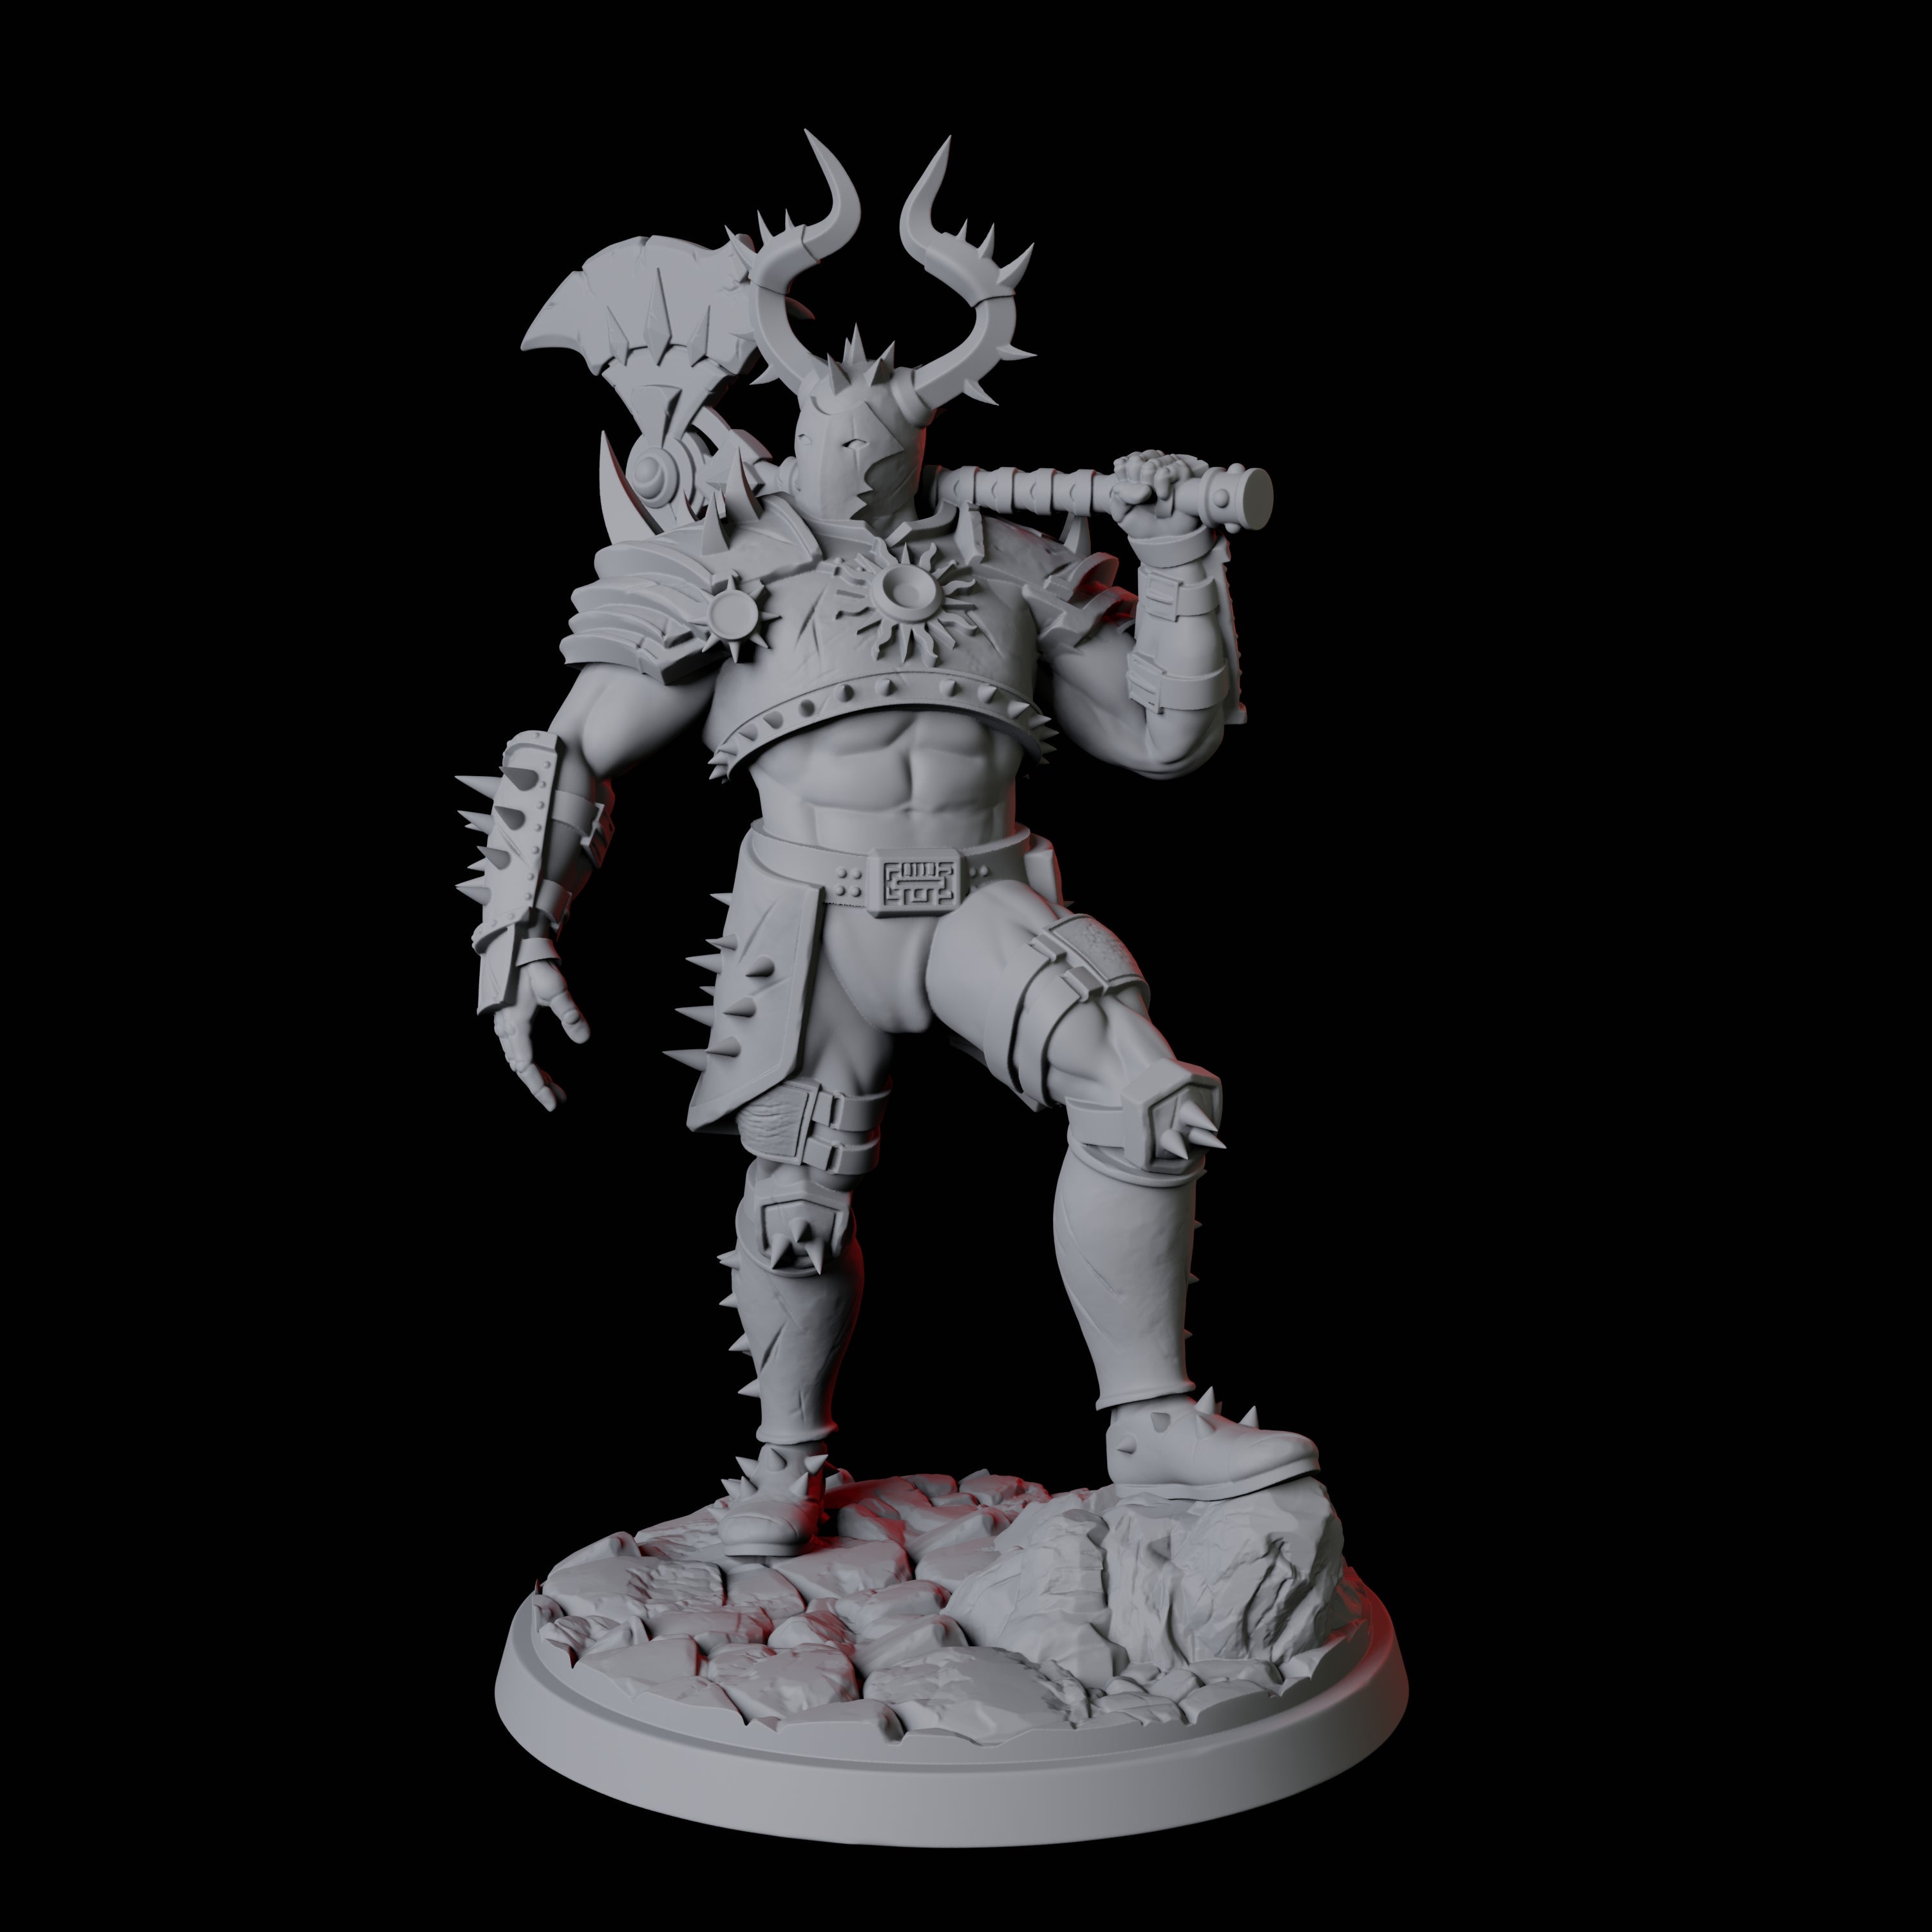 Spiked Armour Champion Miniature for Dungeons and Dragons, Pathfinder or other TTRPGs